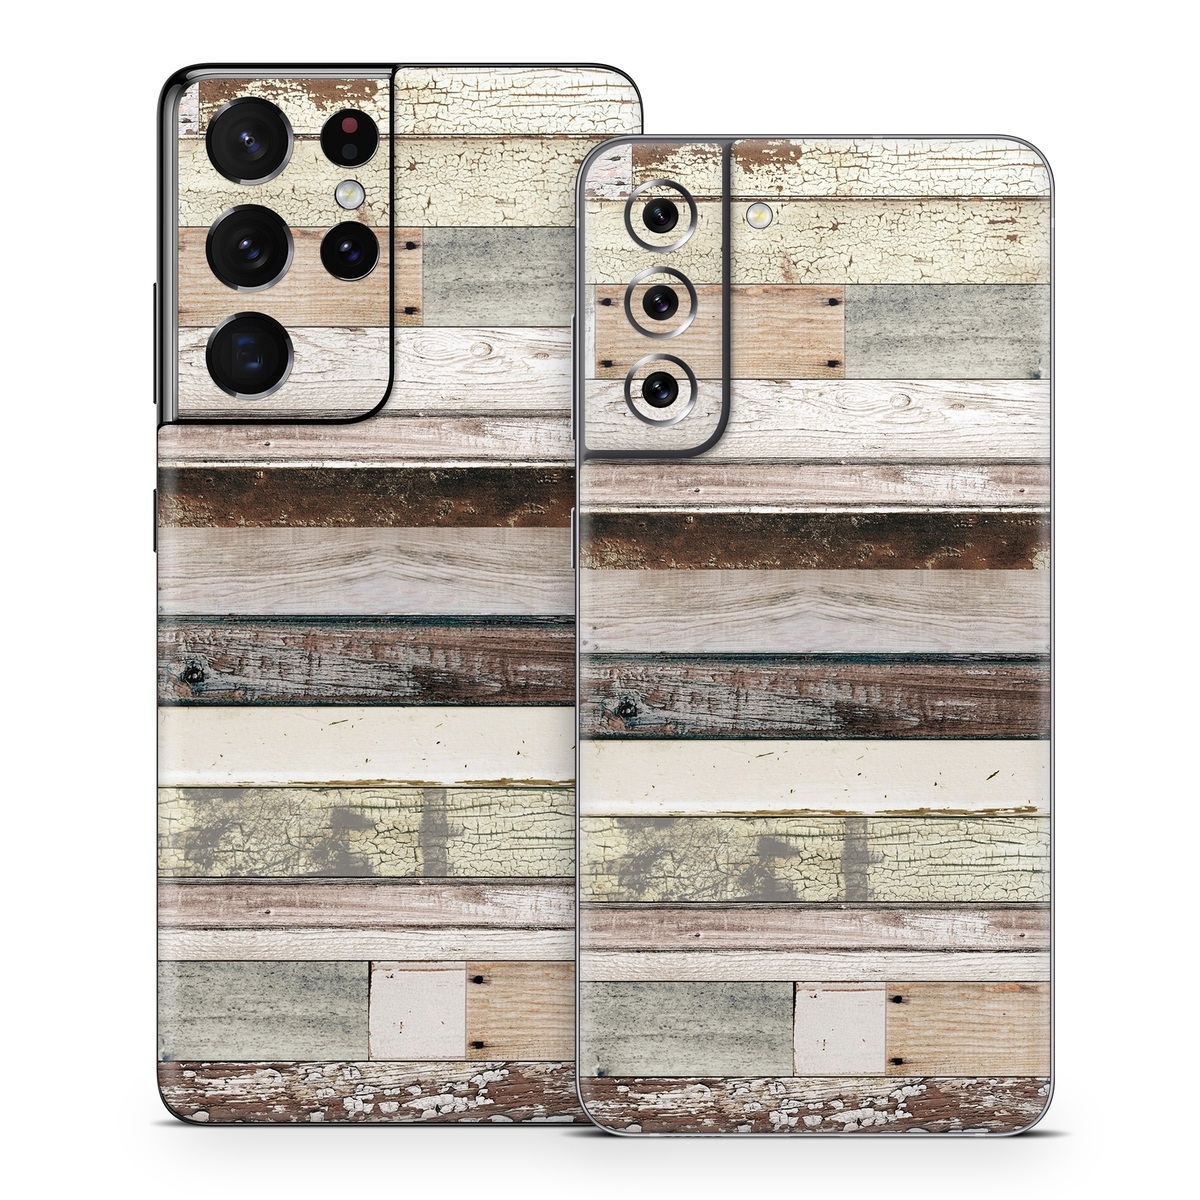 Samsung Galaxy S21 Skin design of Wood, Wall, Plank, Line, Lumber, Wood stain, Beige, Parallel, Hardwood, Pattern, with brown, white, gray, yellow colors